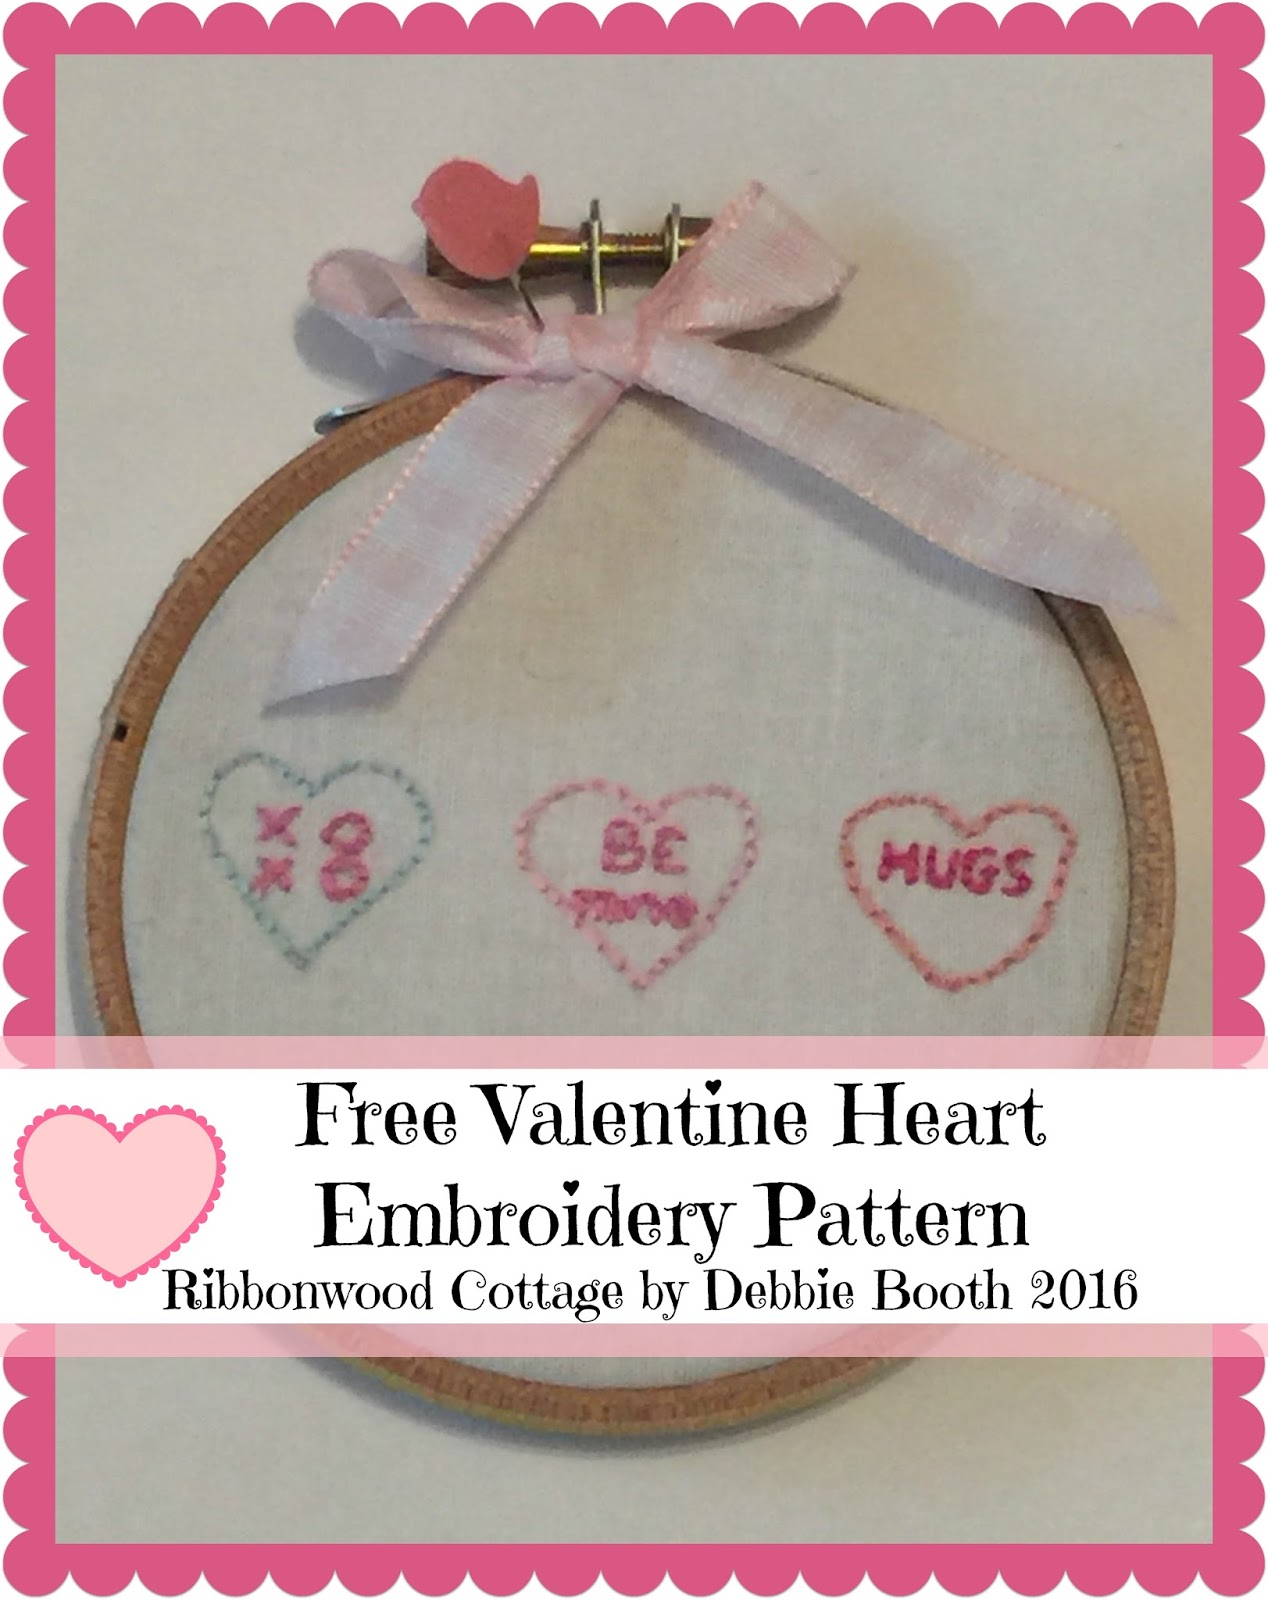 Ribbonwood Cottage New Embroidery Patterns and a Free Valentine's Day